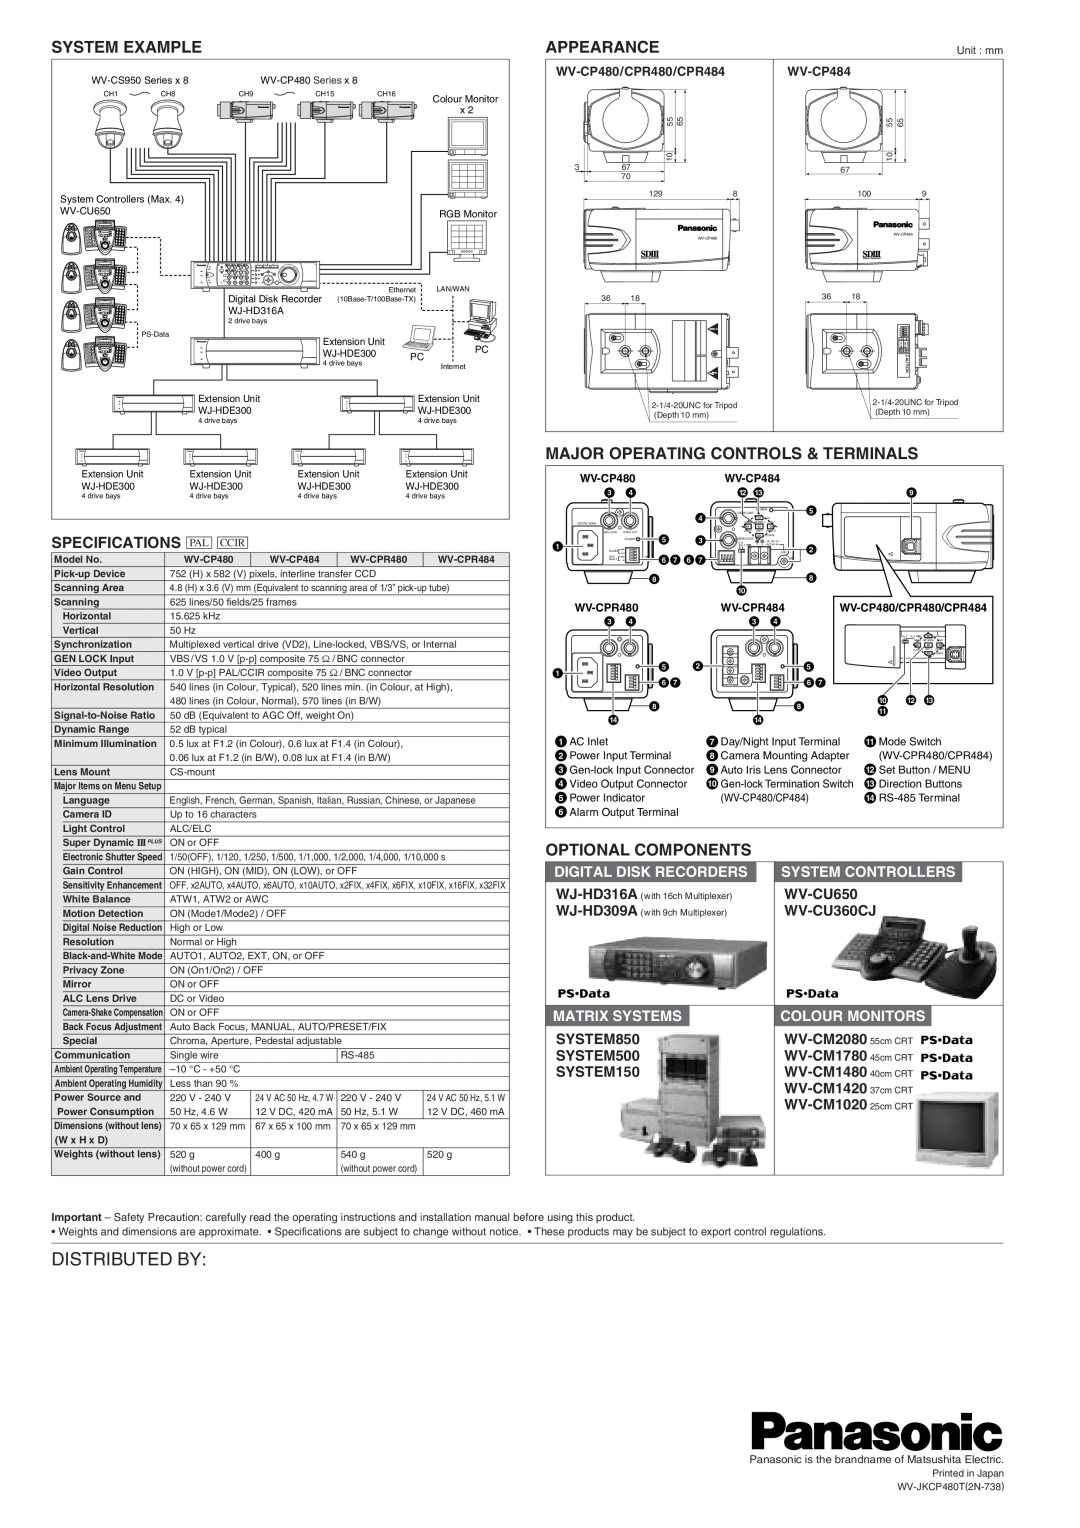 Panasonic WV-CP480 Distributed By, System Example, Appearance, Major Operating Controls & Terminals, Optional Components 